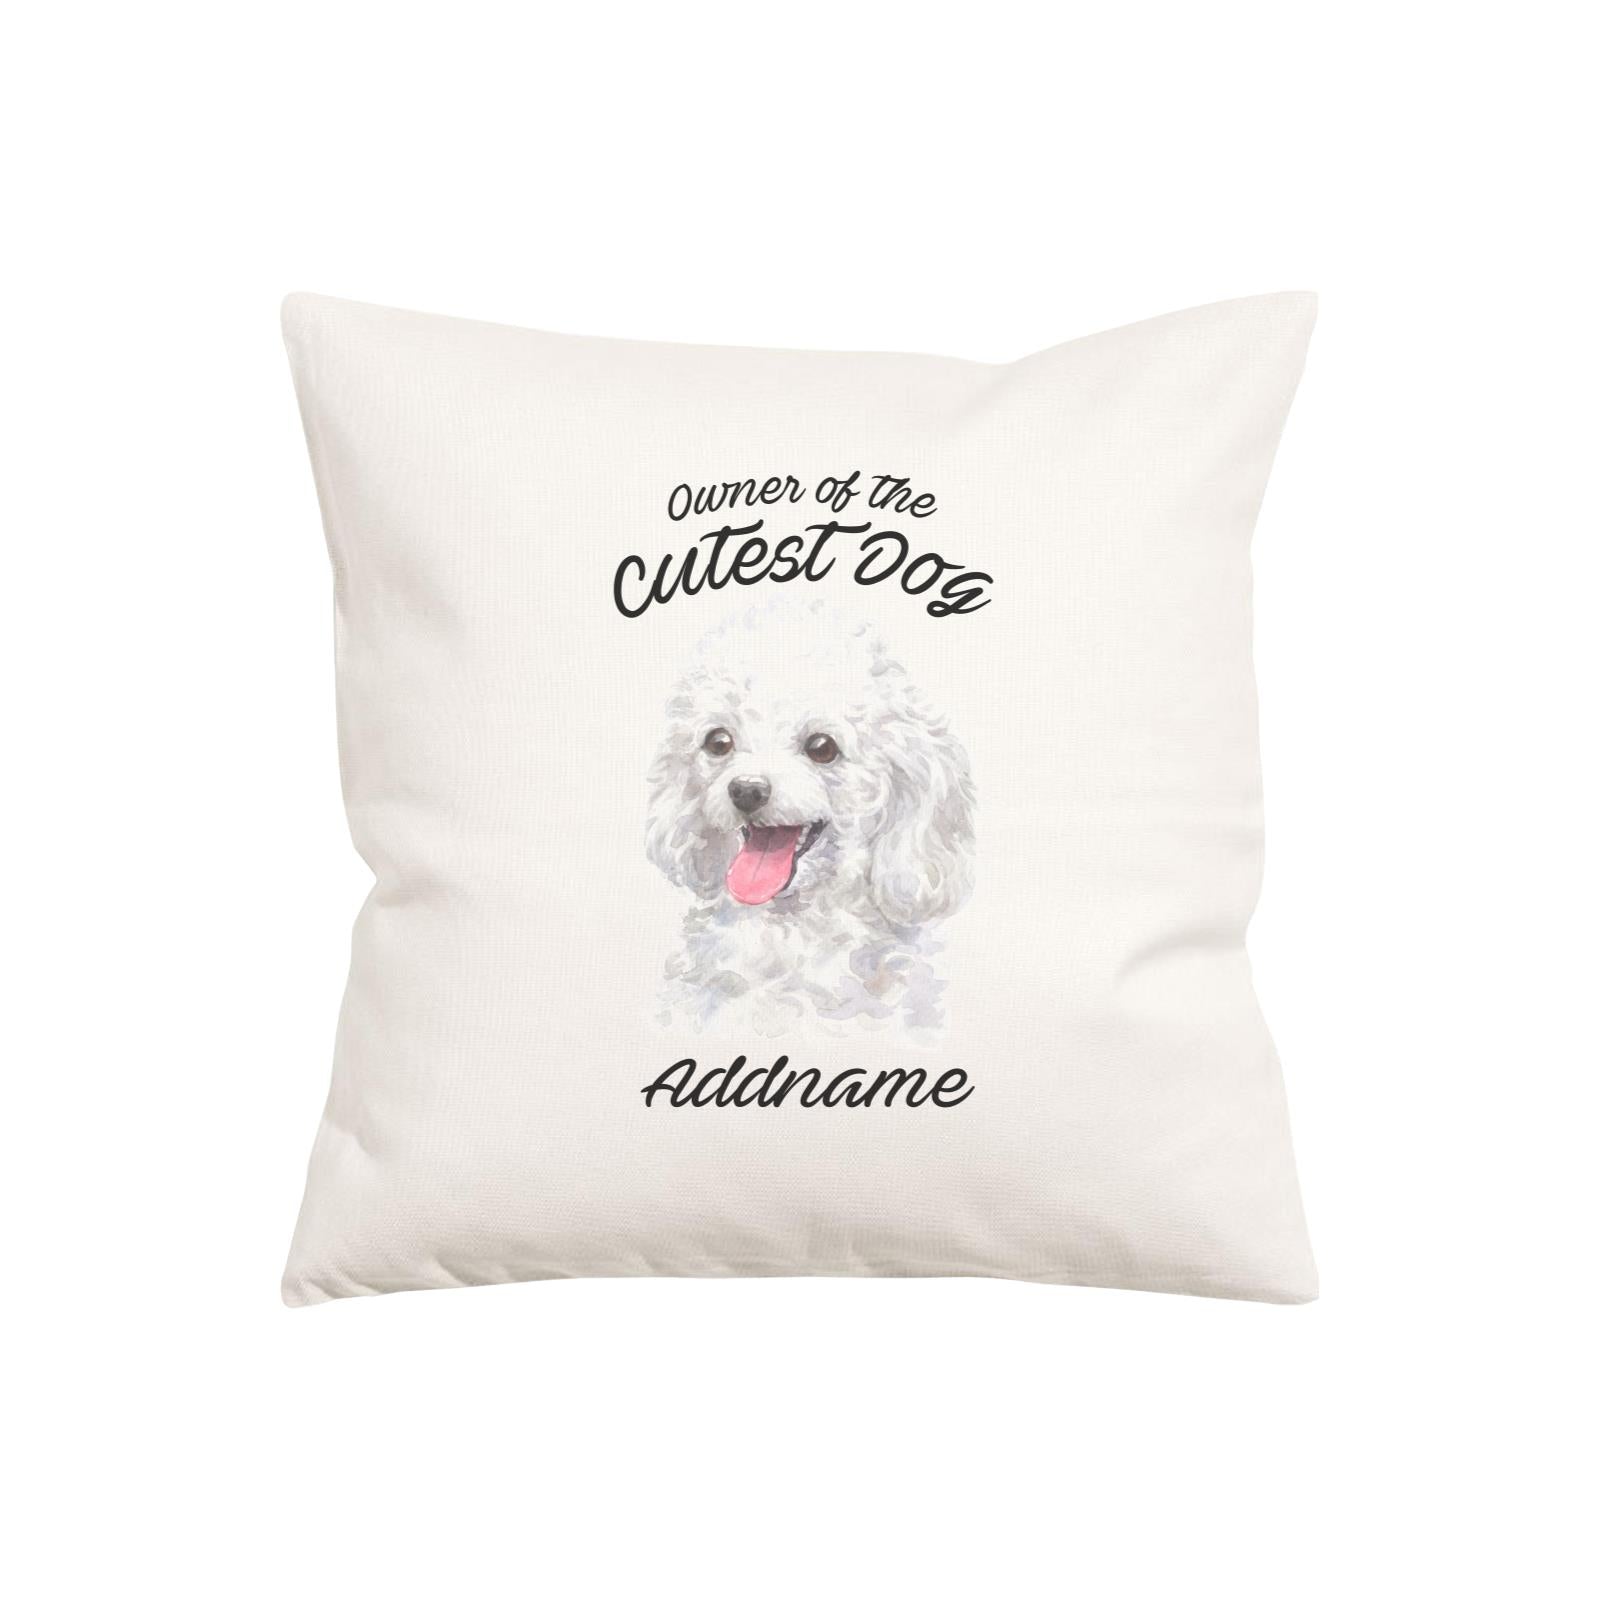 Watercolor Dog Owner Of The Cutest Dog Poodle White Addname Pillow Cushion